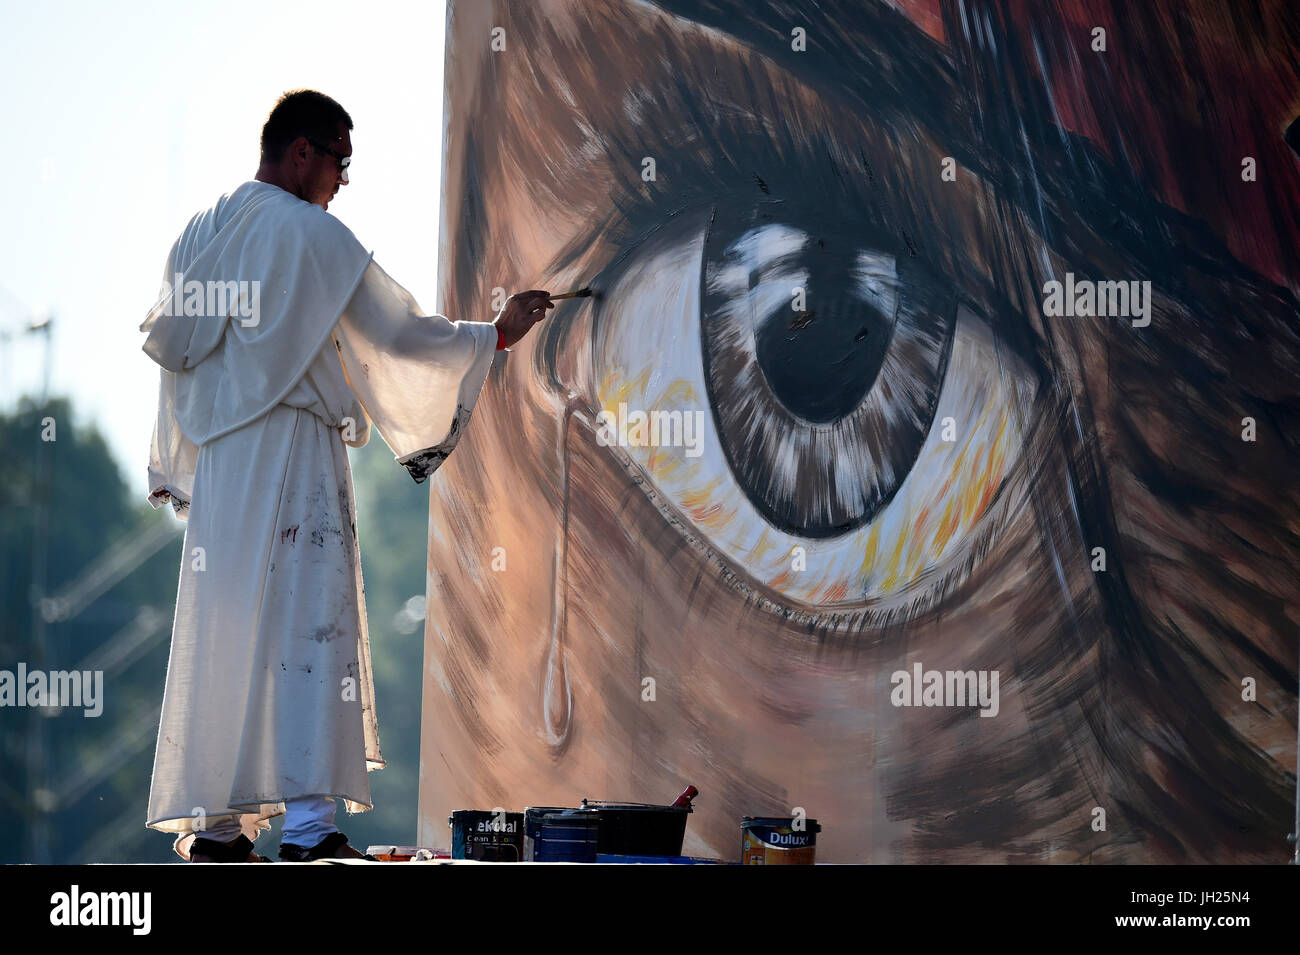 World Youth Day. Krakow. 2016. Priest painting. Poland. Stock Photo